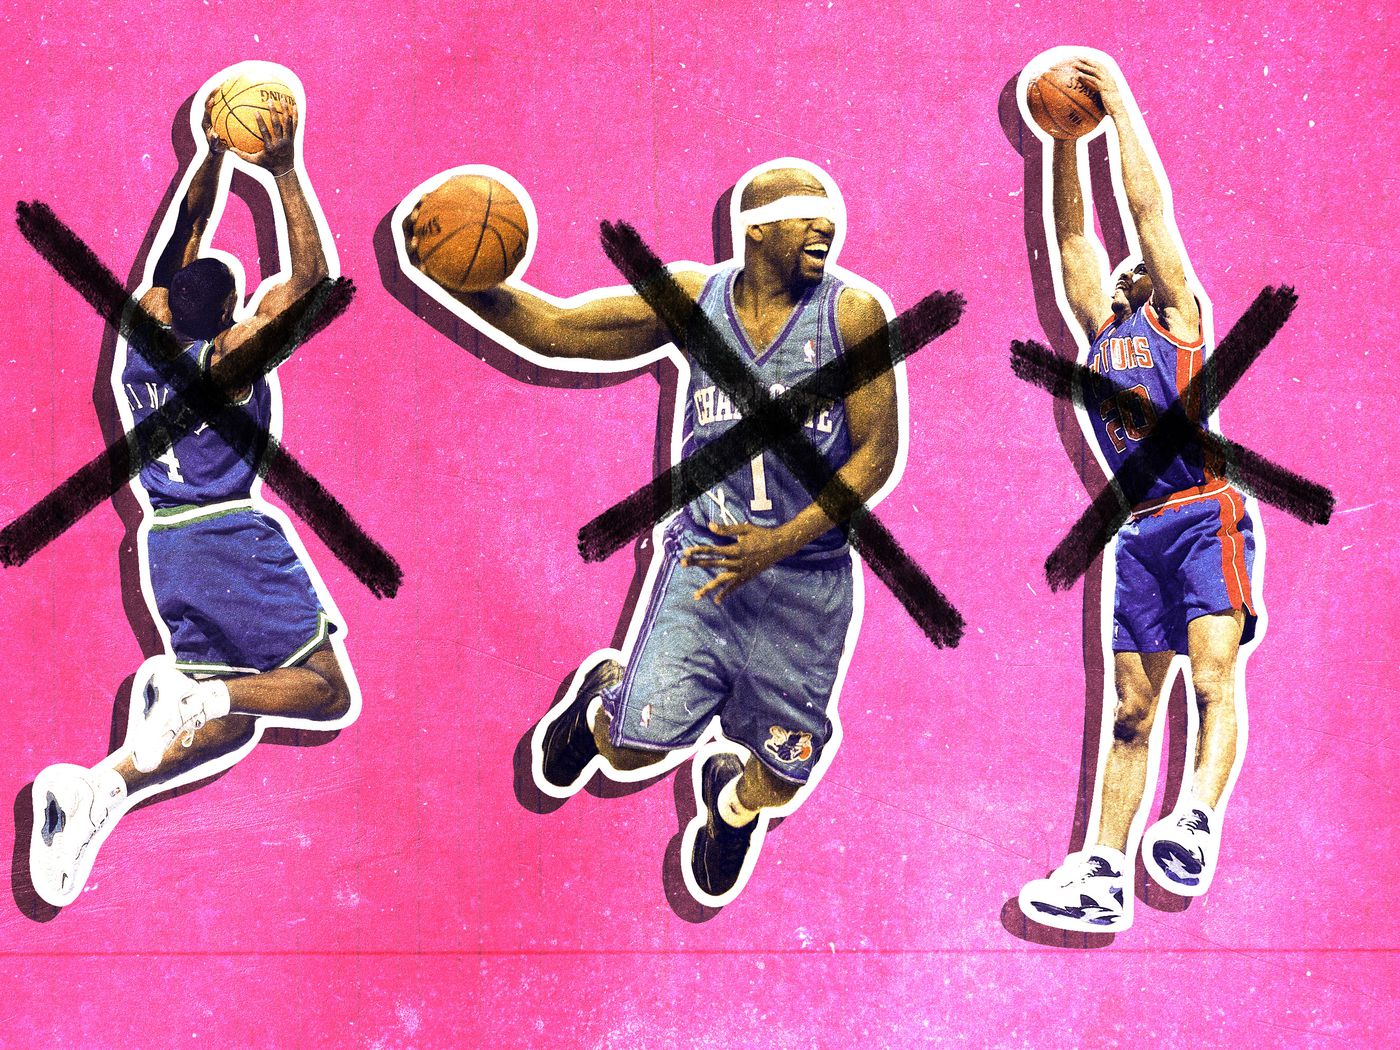 Baron Davis of the Eastern Conference All-Stars dunks against the